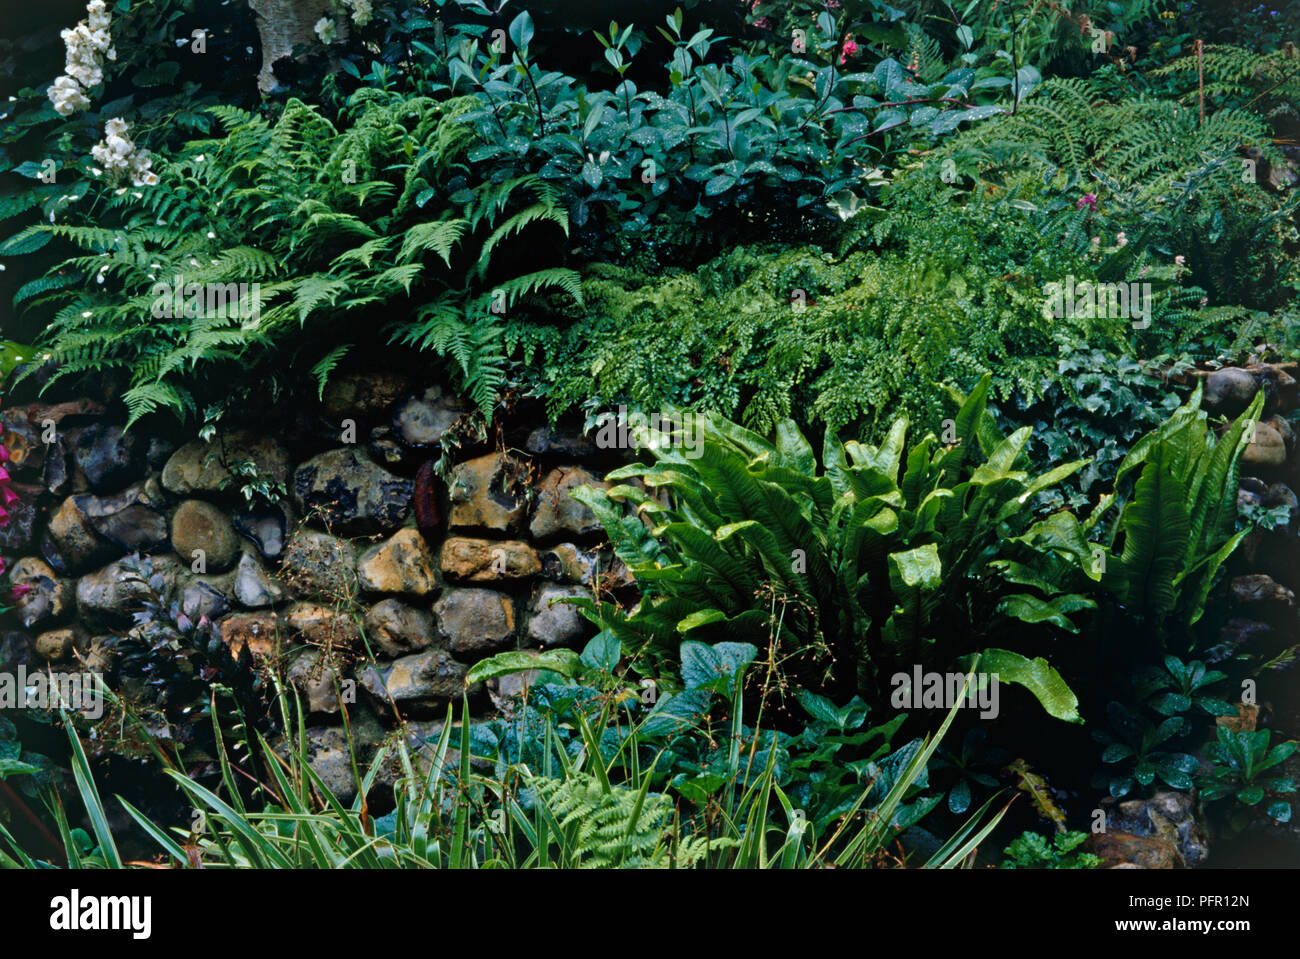 Hart's Tongue, Shield and Chain ferns growing near stone wall in botanical garden Stock Photo